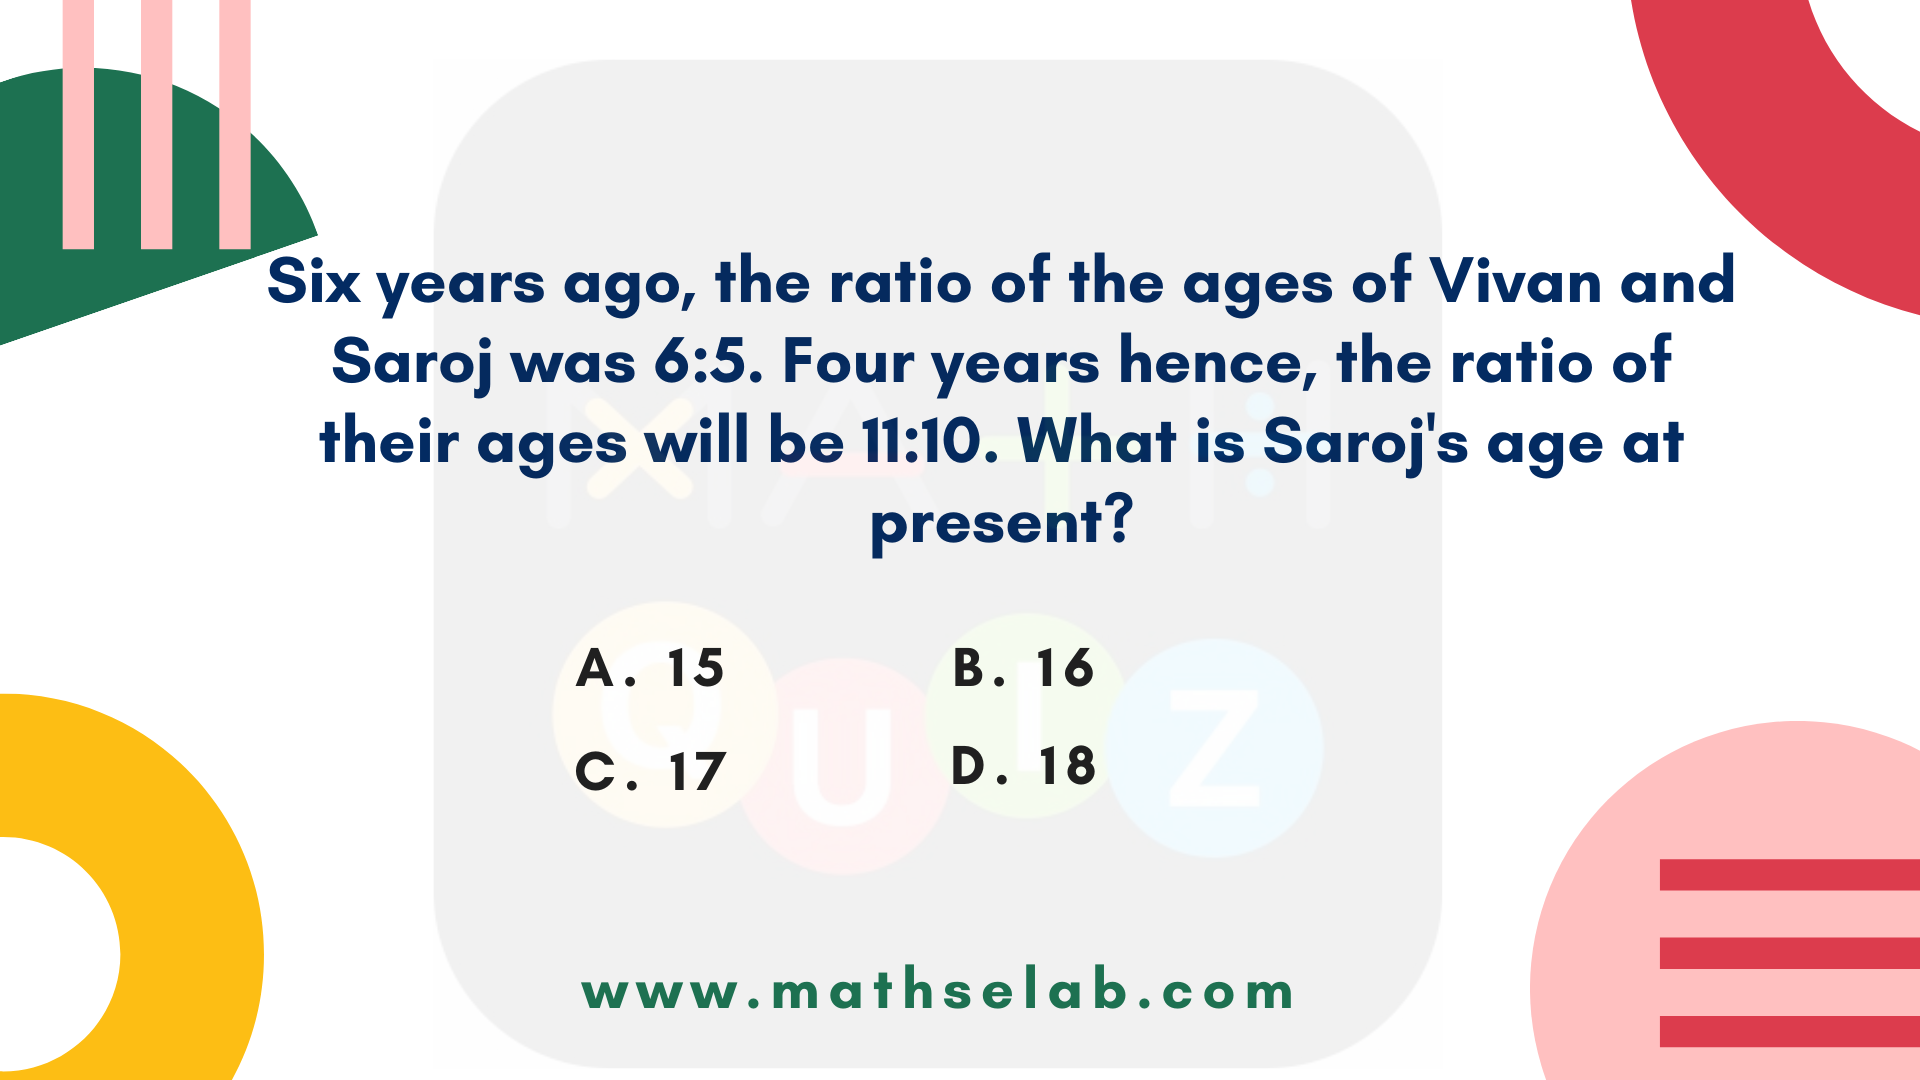 Six years ago, the ratio of the ages of Vivan and Saroj was 65. Four years hence, the ratio of their ages will be 1110. What is Saroj's age at present - www.mathselab.com